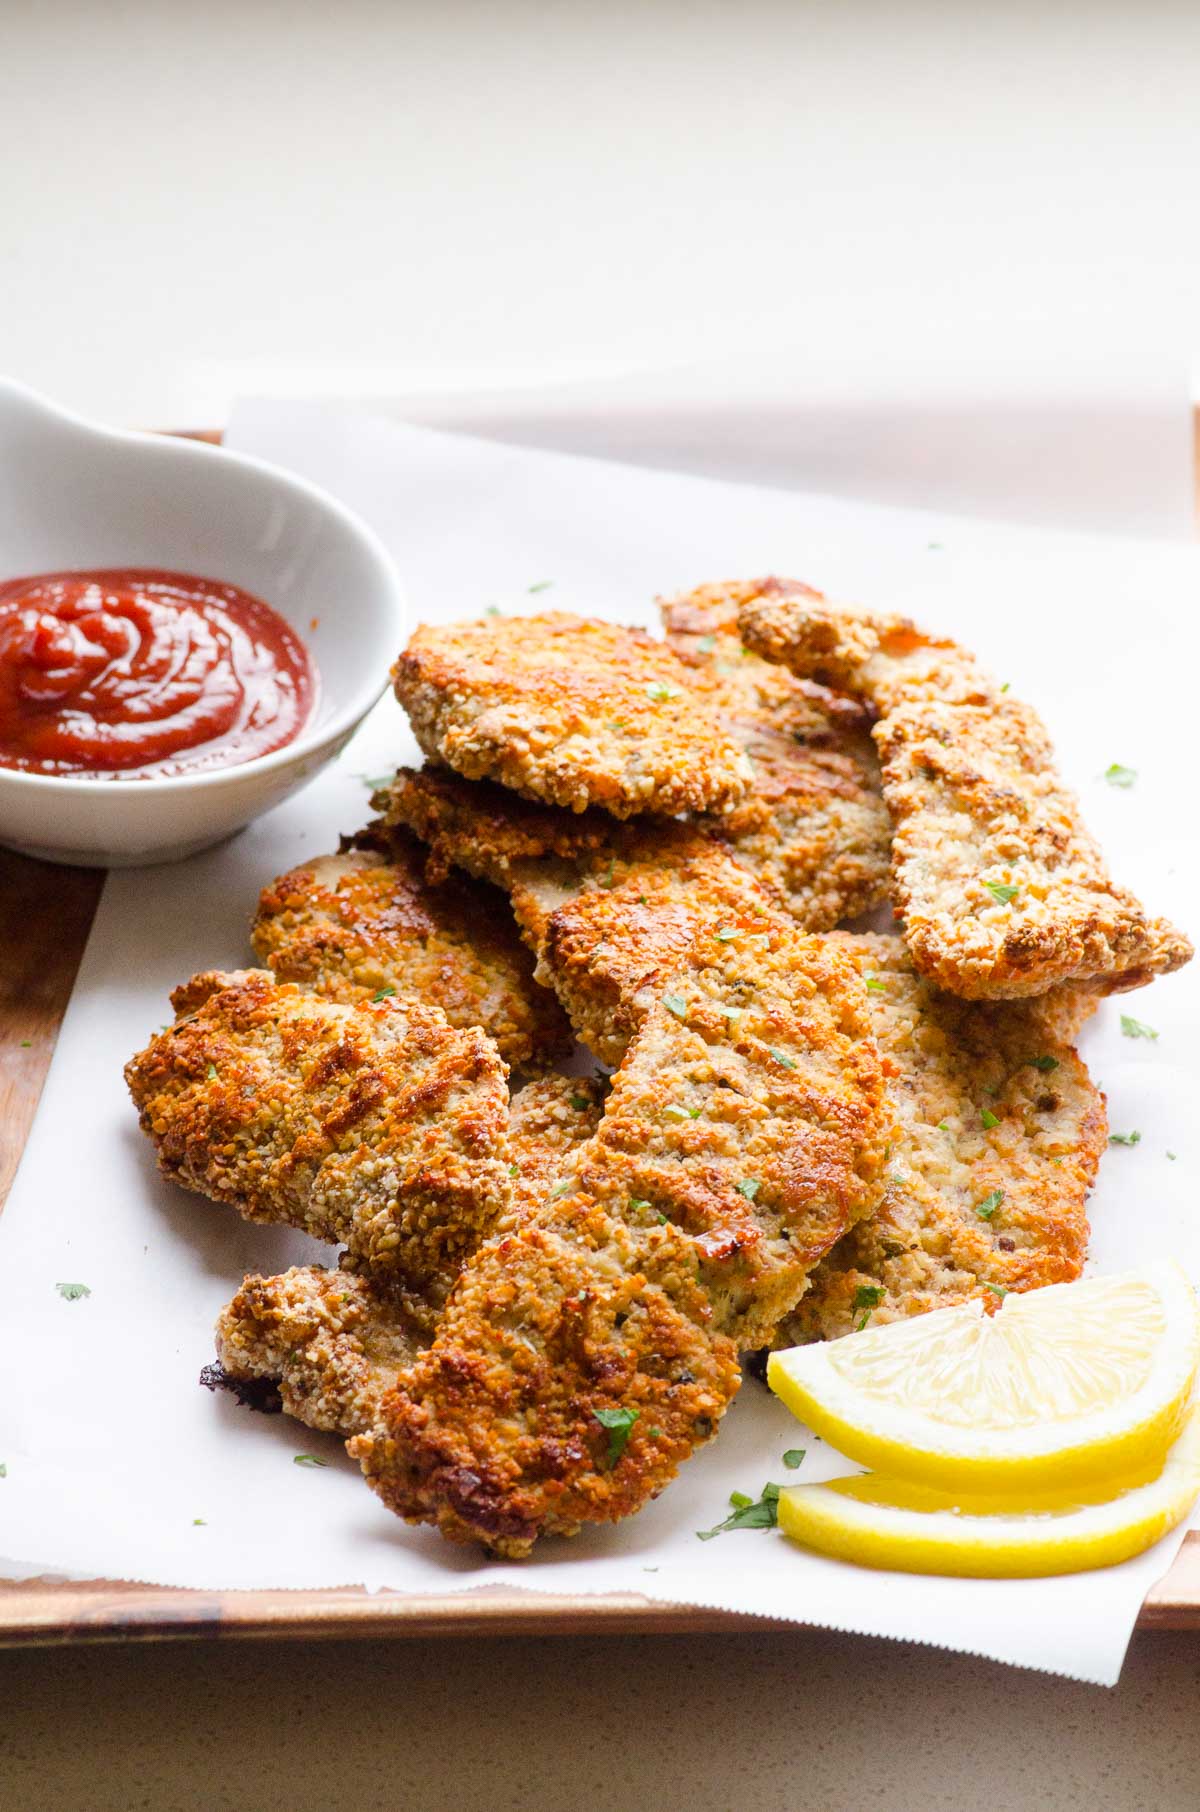 Almond crusted chicken tenders on parchment paper with a lemon wedge and ketchup.